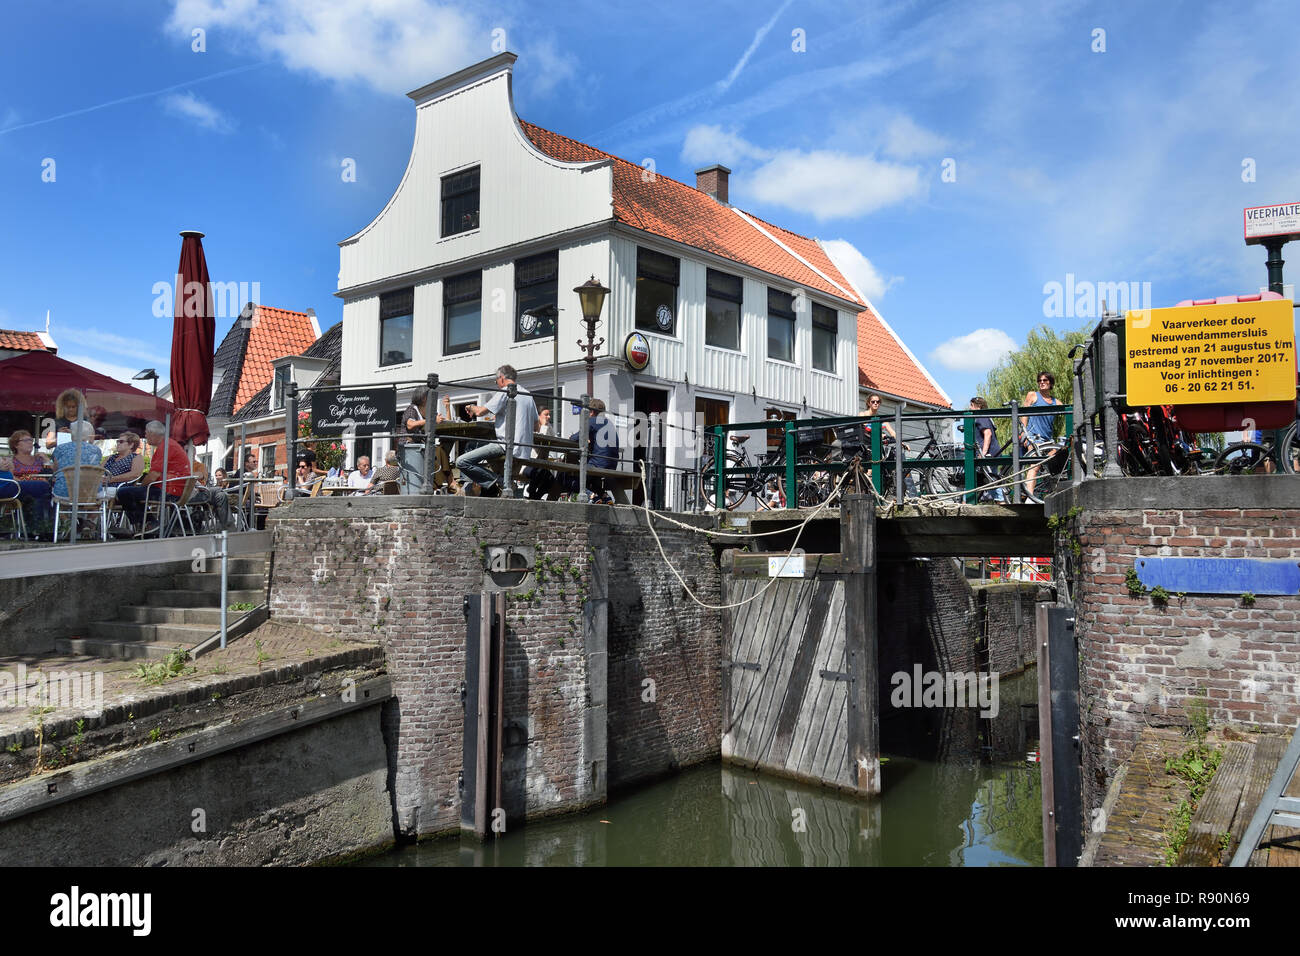 Café t Sluis old, brown café 100 years building 1565, terrace on the water, (a side channel of t IJ), Amsterdam Noord - North, The Netherlands, Dutch, Stock Photo